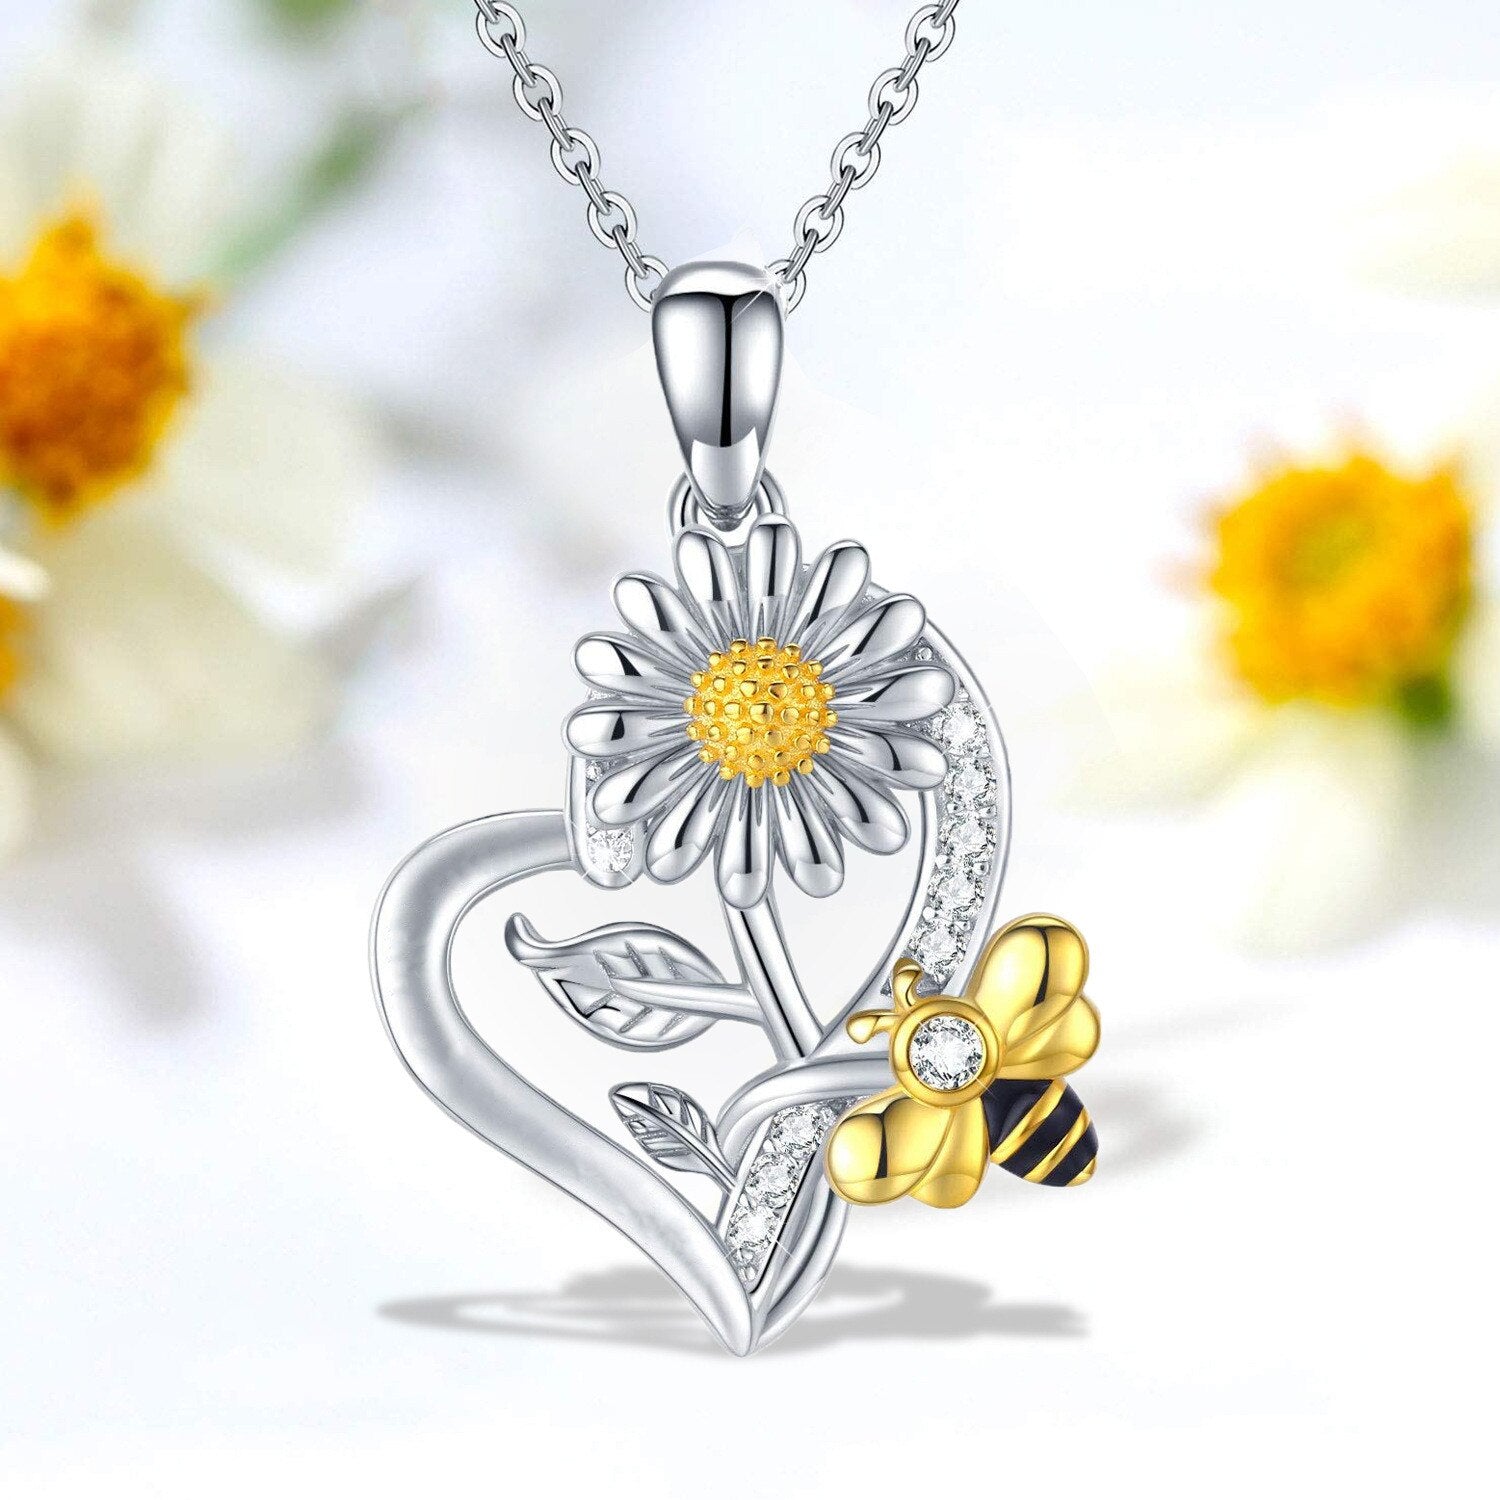 Rose Valley Sunflower Pendant Necklace for Women Bee Pendants Fashion Jewelry Girls Gifts YN057 - Charlie Dolly